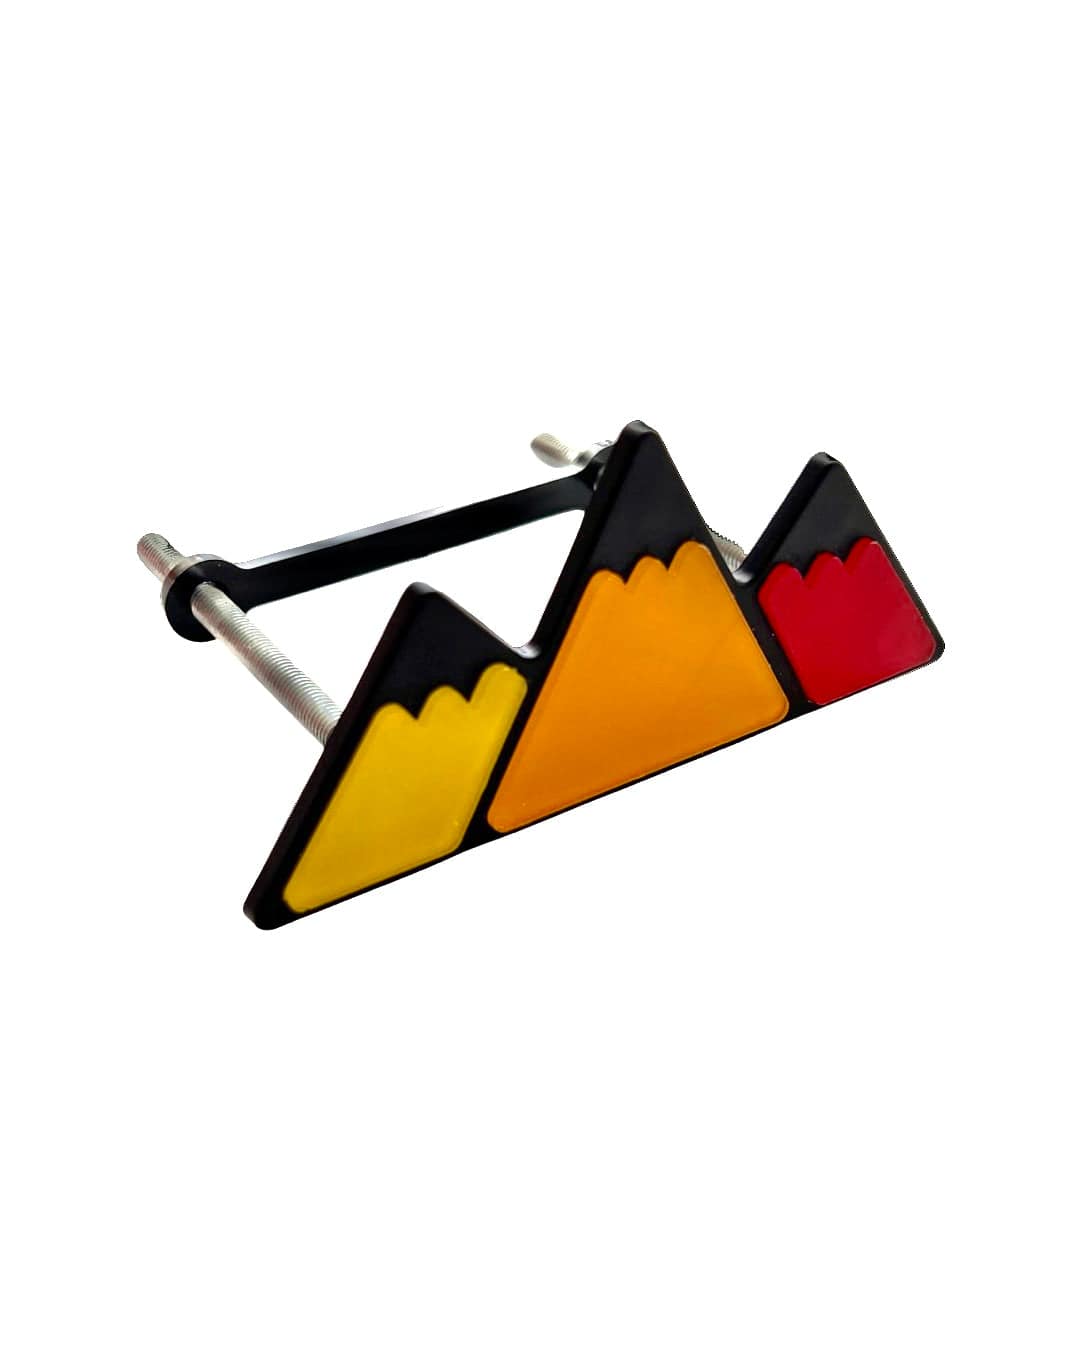 Mountain Grille Badge (Red Scheme) - Mid-Atlantic Off-Roading